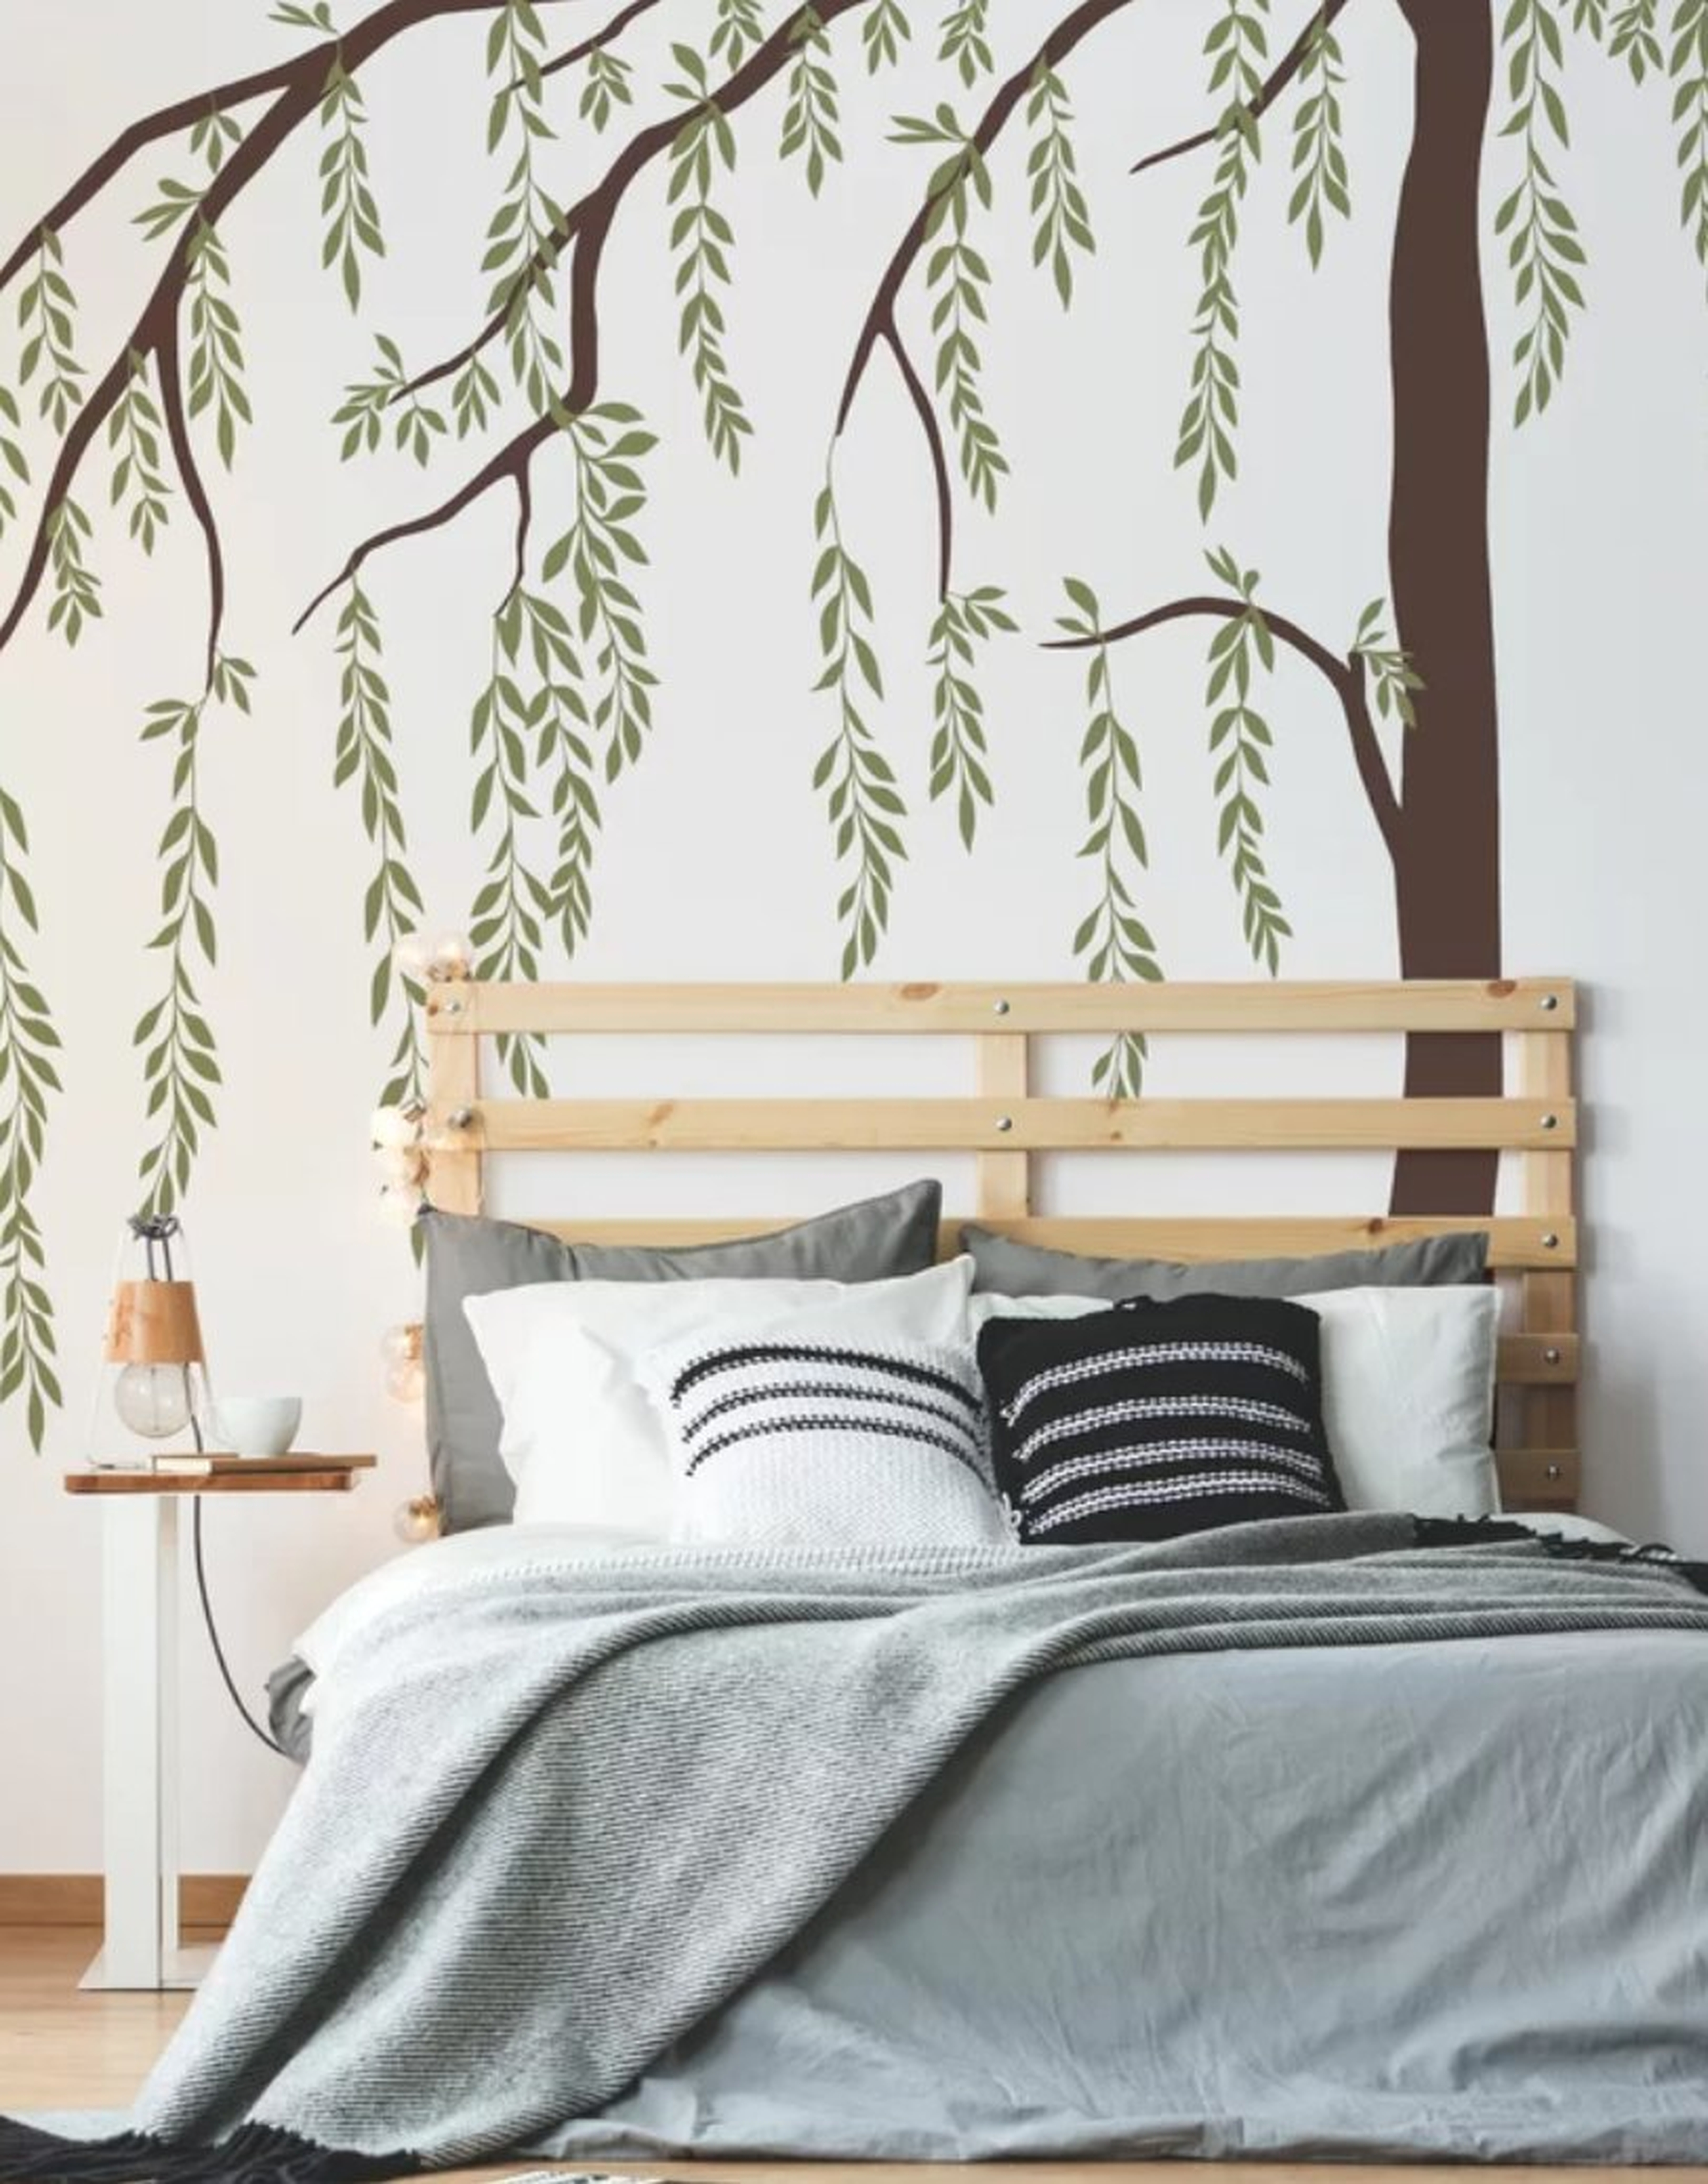 Leafy Weeping Willow Tree Wall Decal - Wayfair